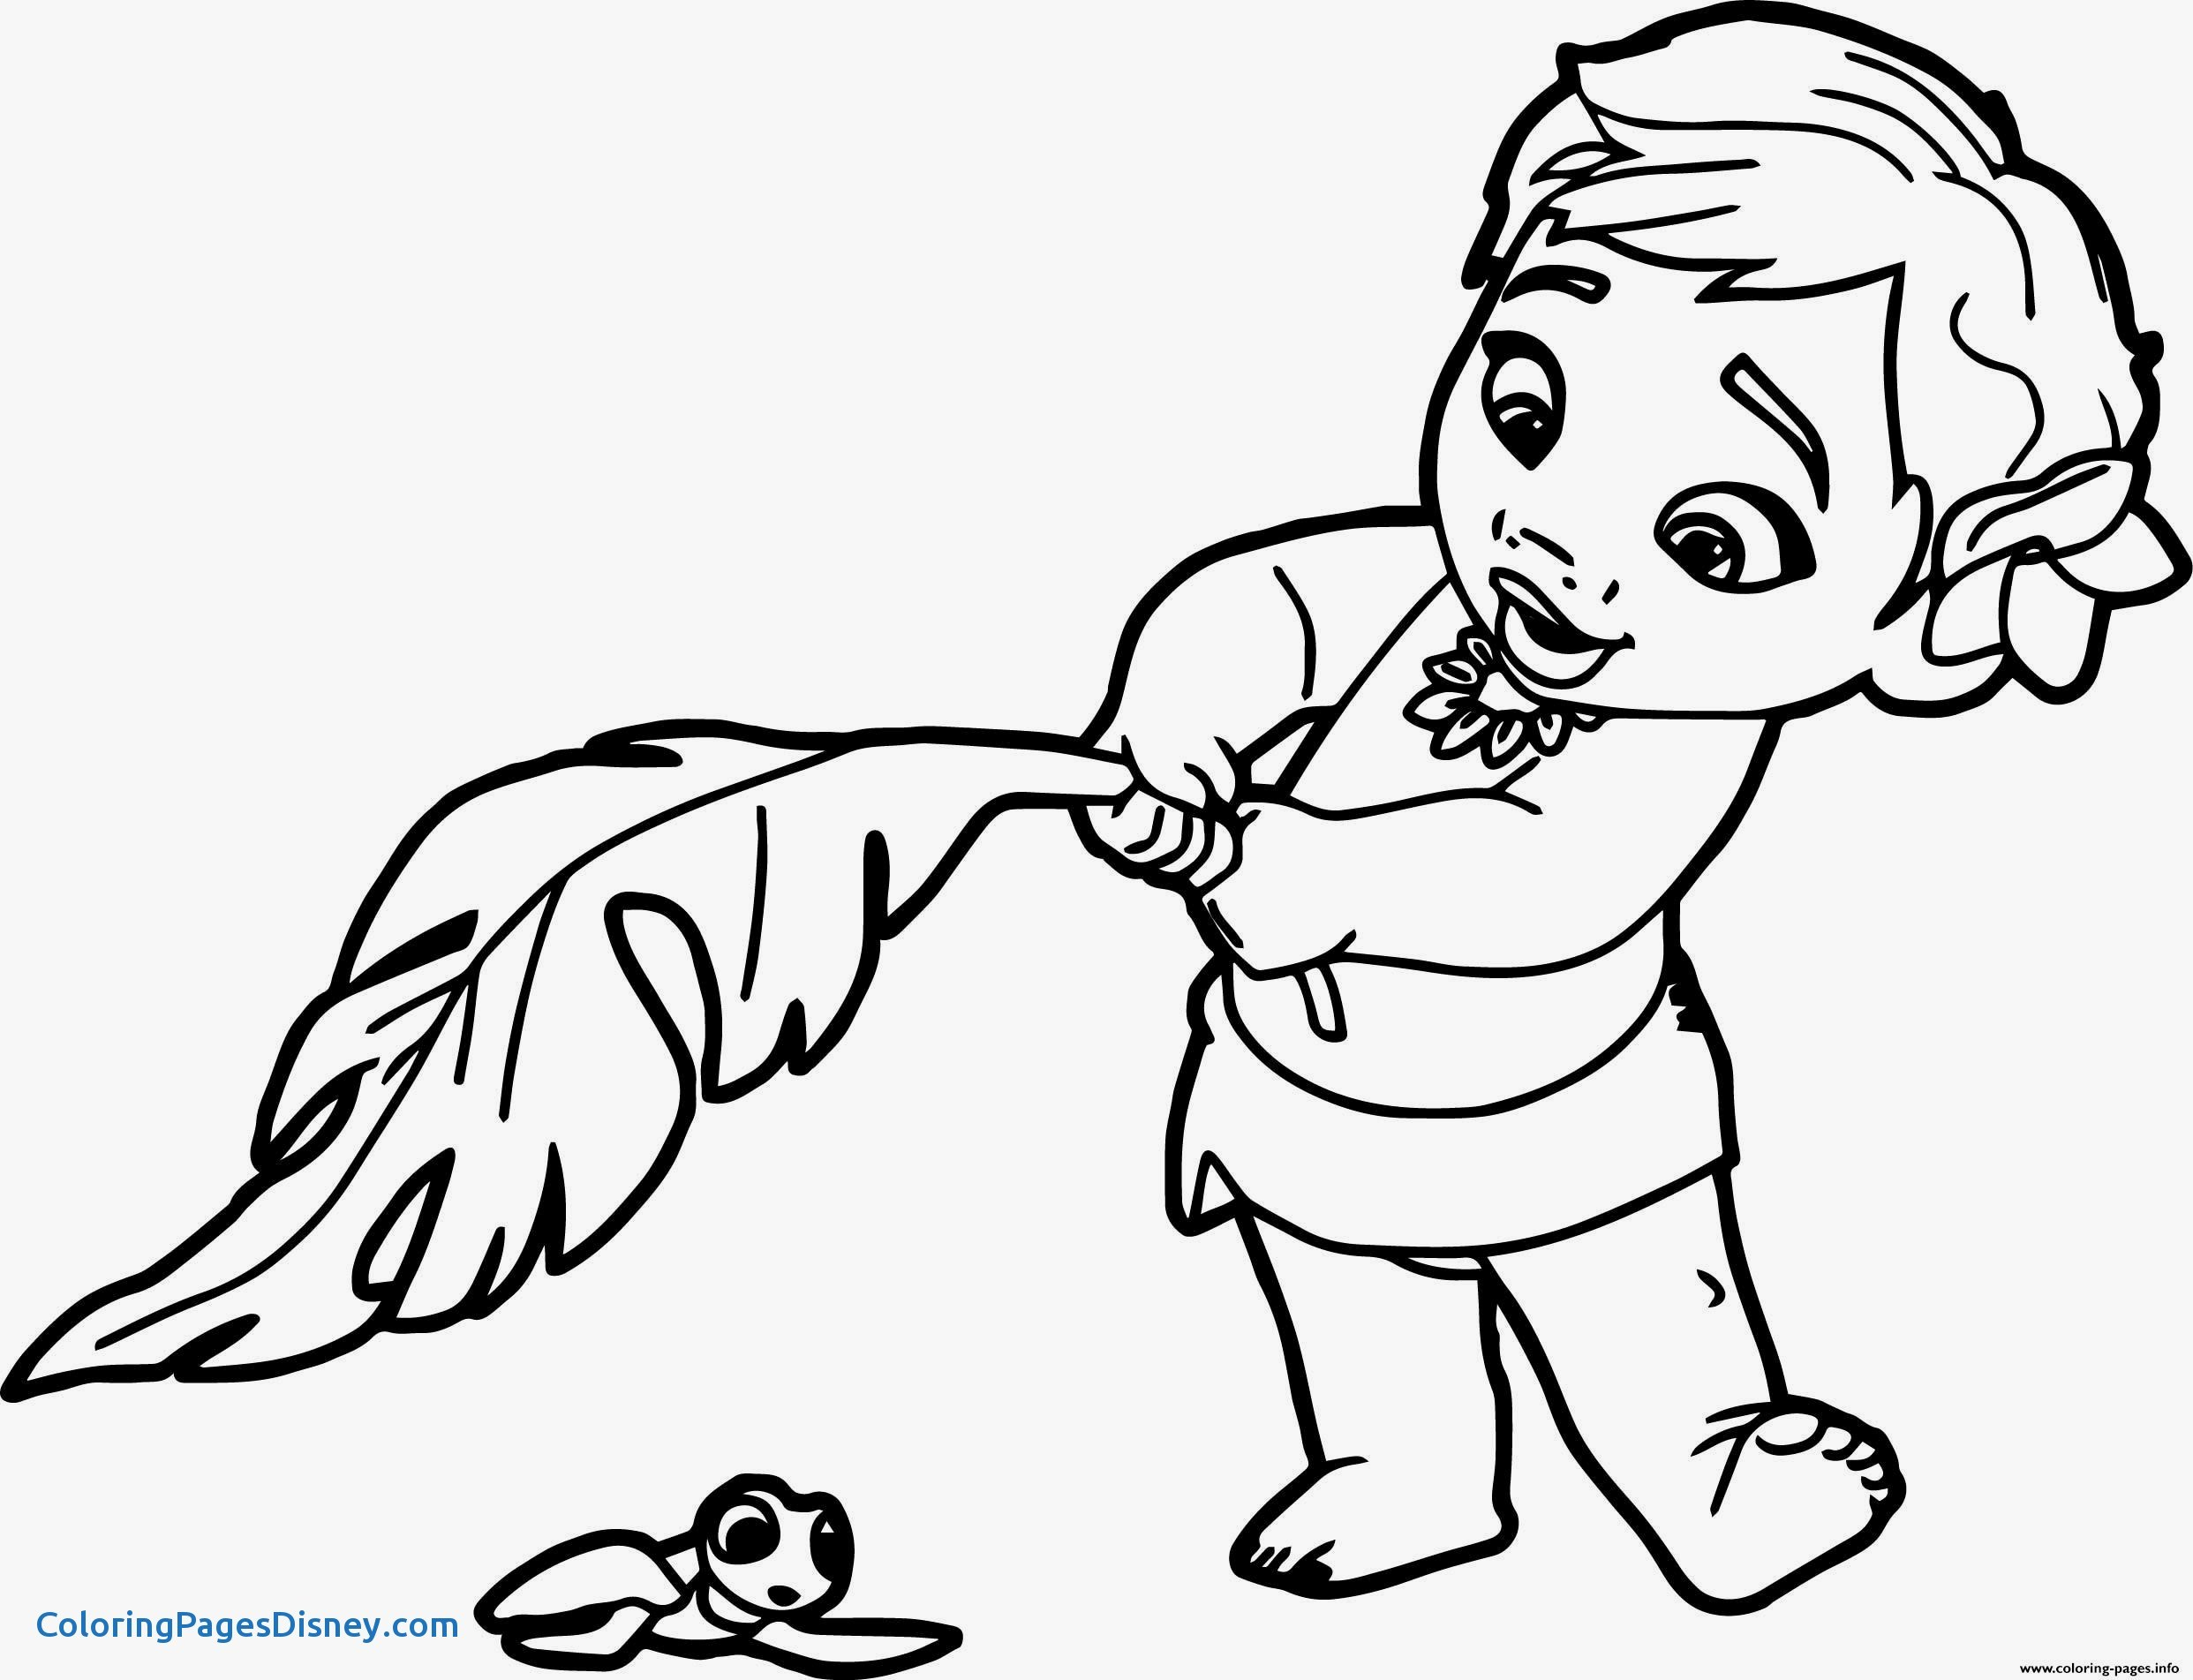 Disney.com Coloring Pages Moana Disney Coloring Pages At Getdrawings Free For Personal